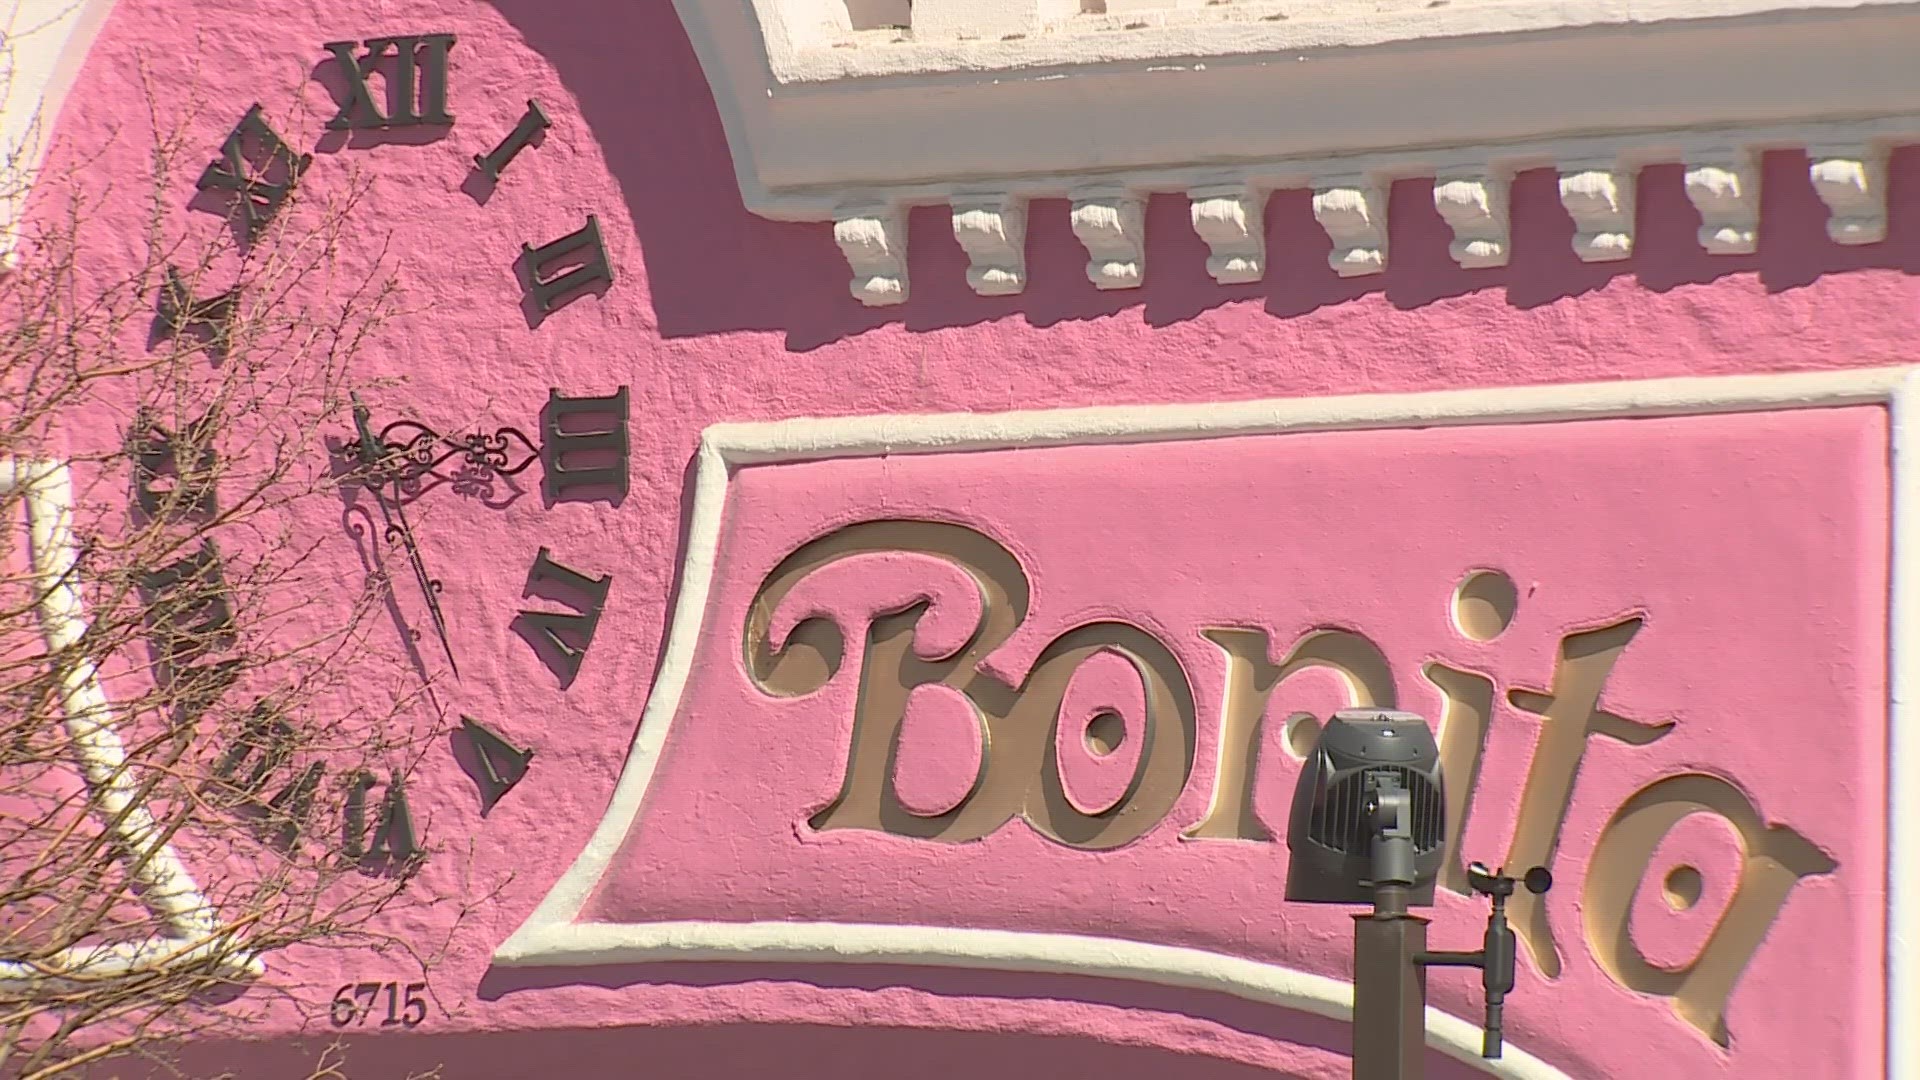 Casa Bonita will be sponsoring the race's volunteers in May. The sponsorship means 1,500 race volunteers will be a sea of pink in limited edition Casa Bonita shirts.